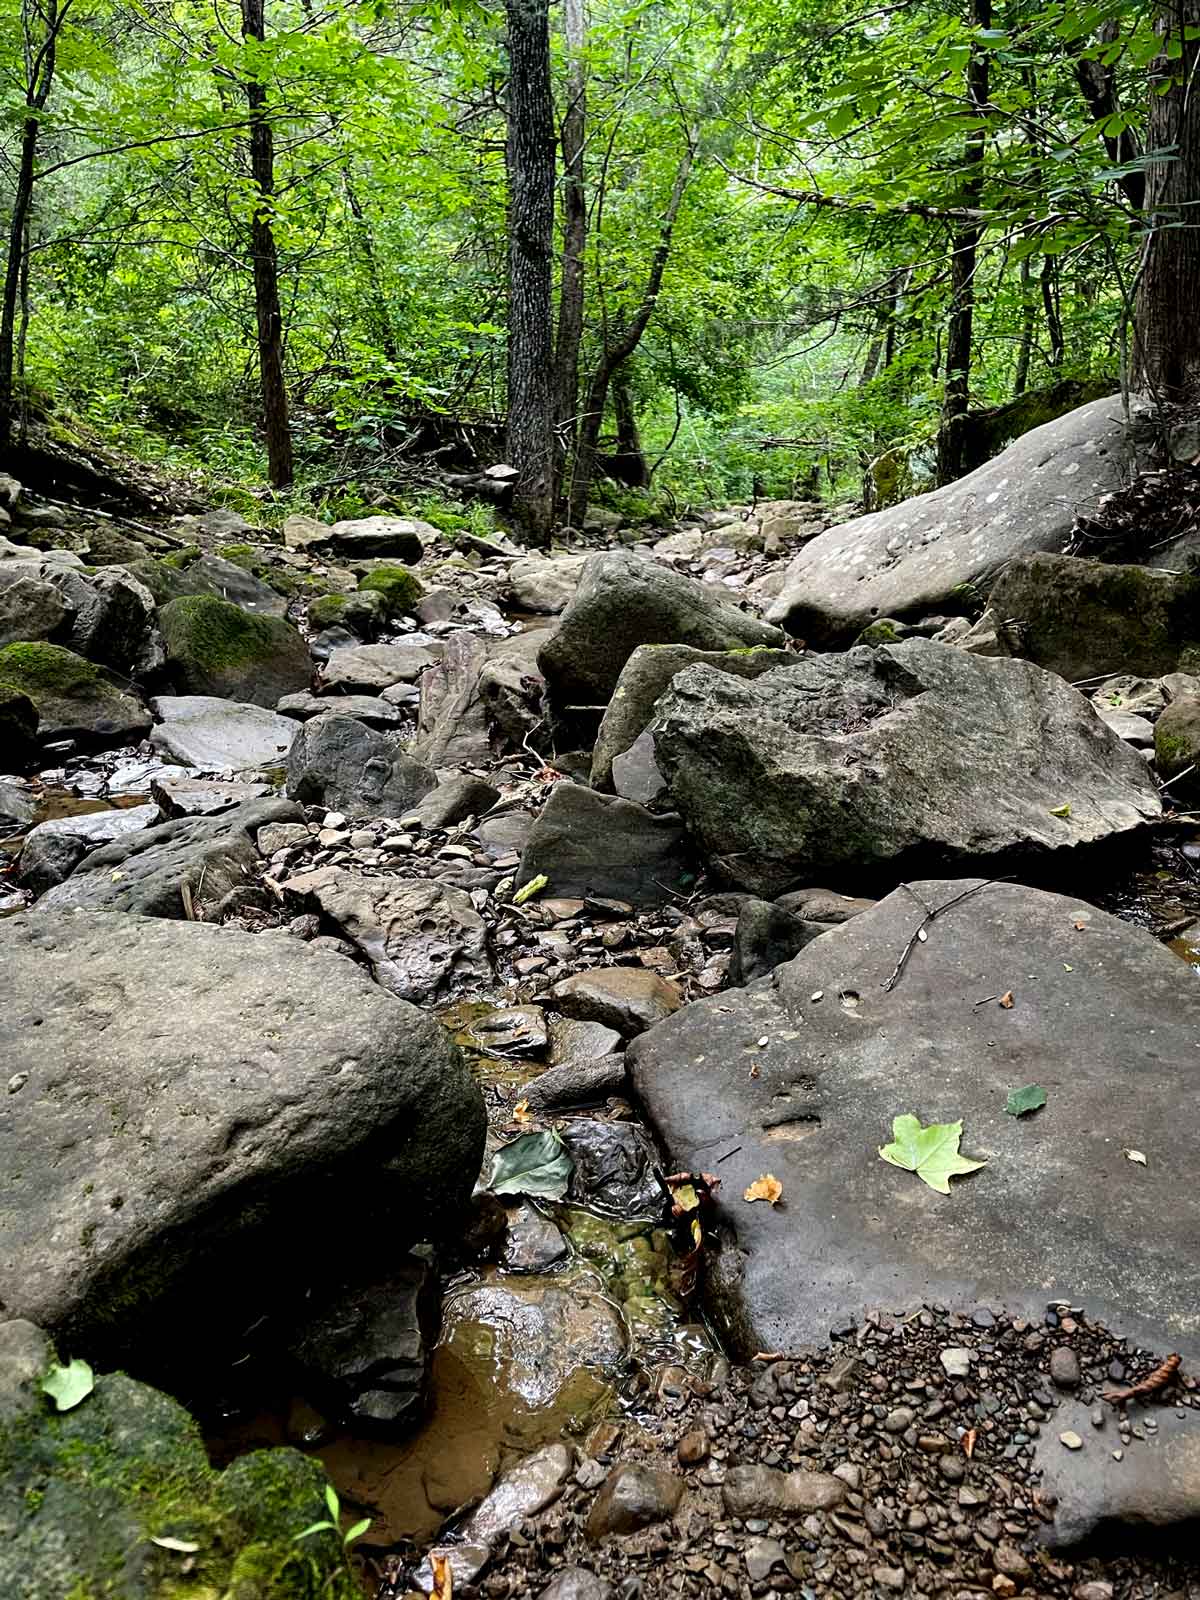 Our almost dry creek. During the sultry days of July, when the rain crow calls close to the house, I can feel the changing of the seasons underway.